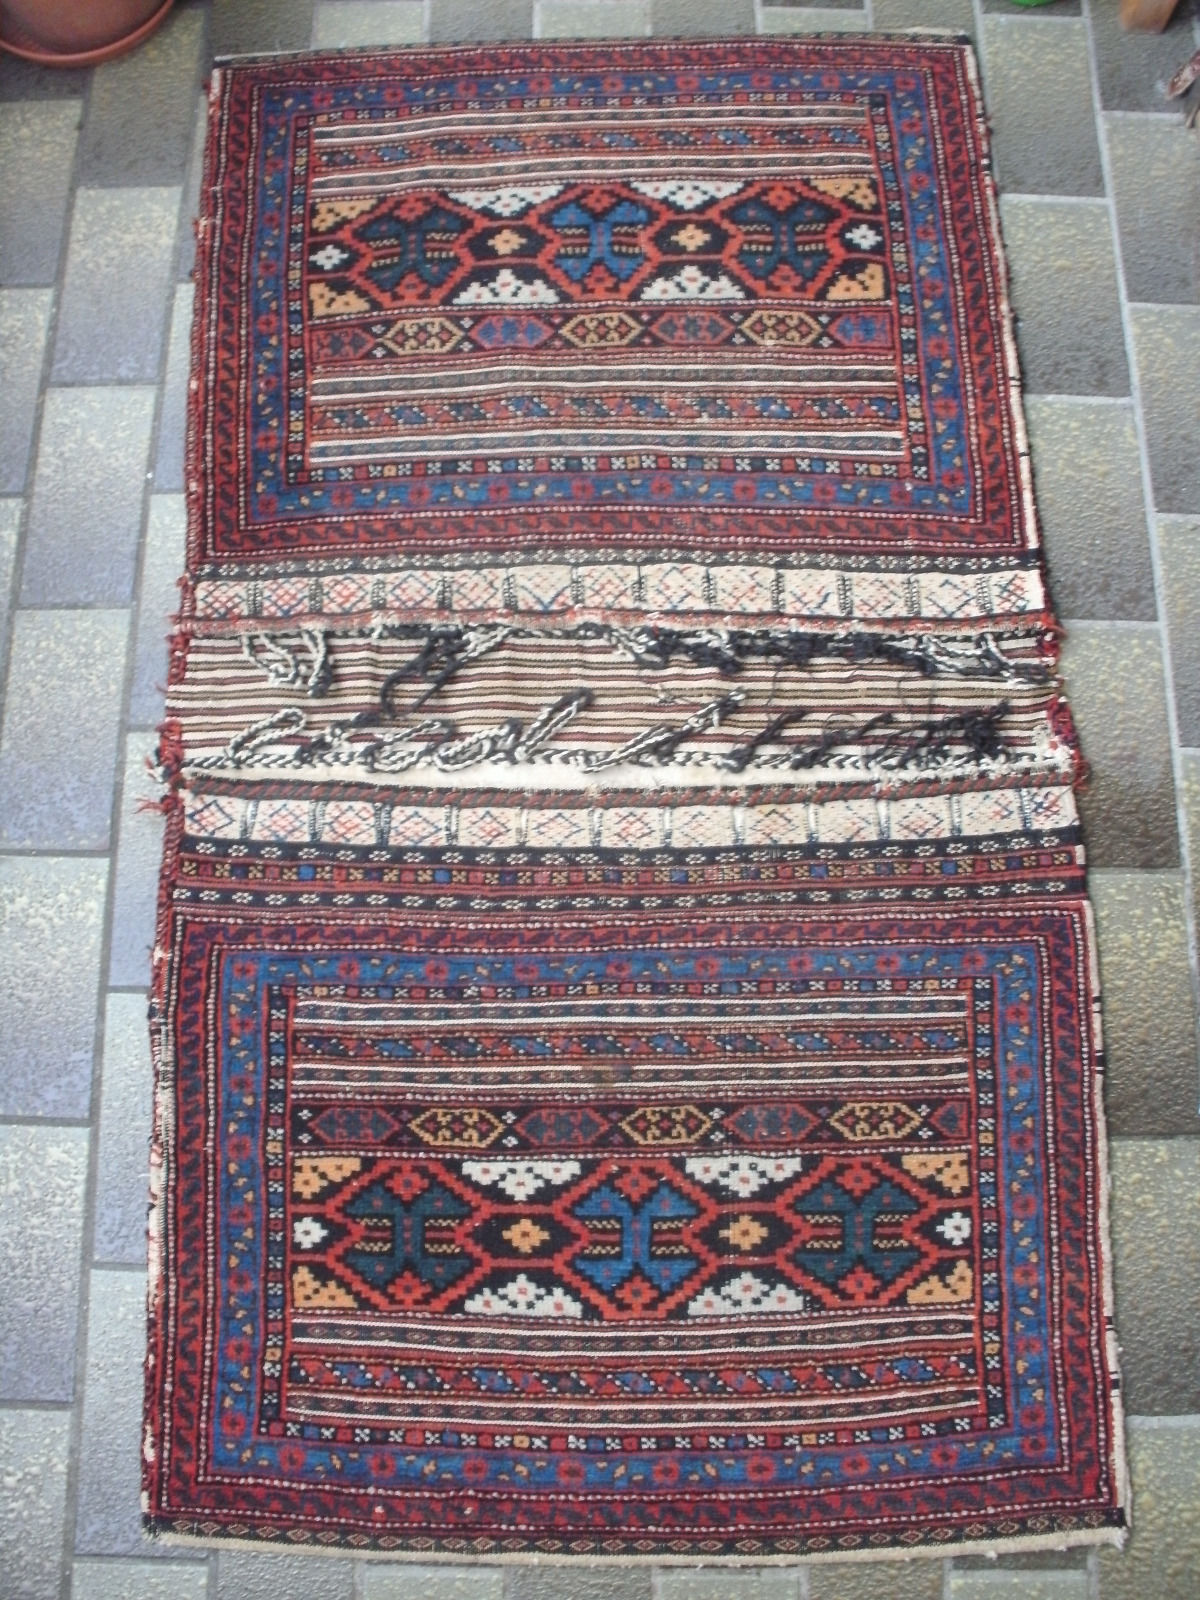 bakhtiary khorjin double bag. double technique sumak and pile. graphic design and in good condition